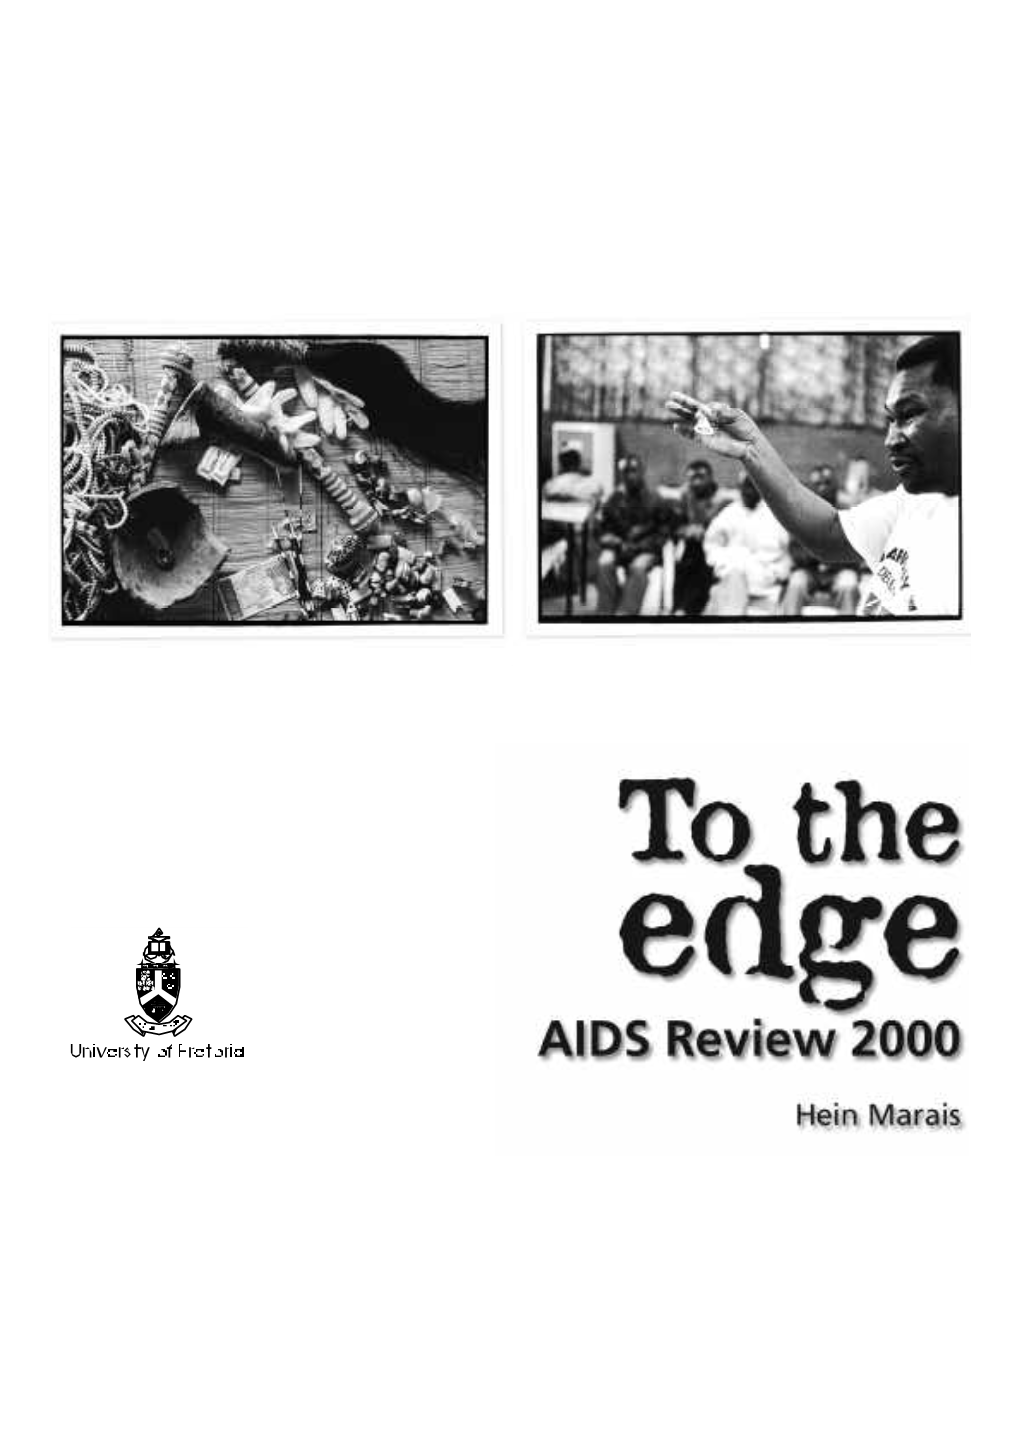 AIDS Review 2000 to the Edge 2 AIDS Review 2000 Foreword